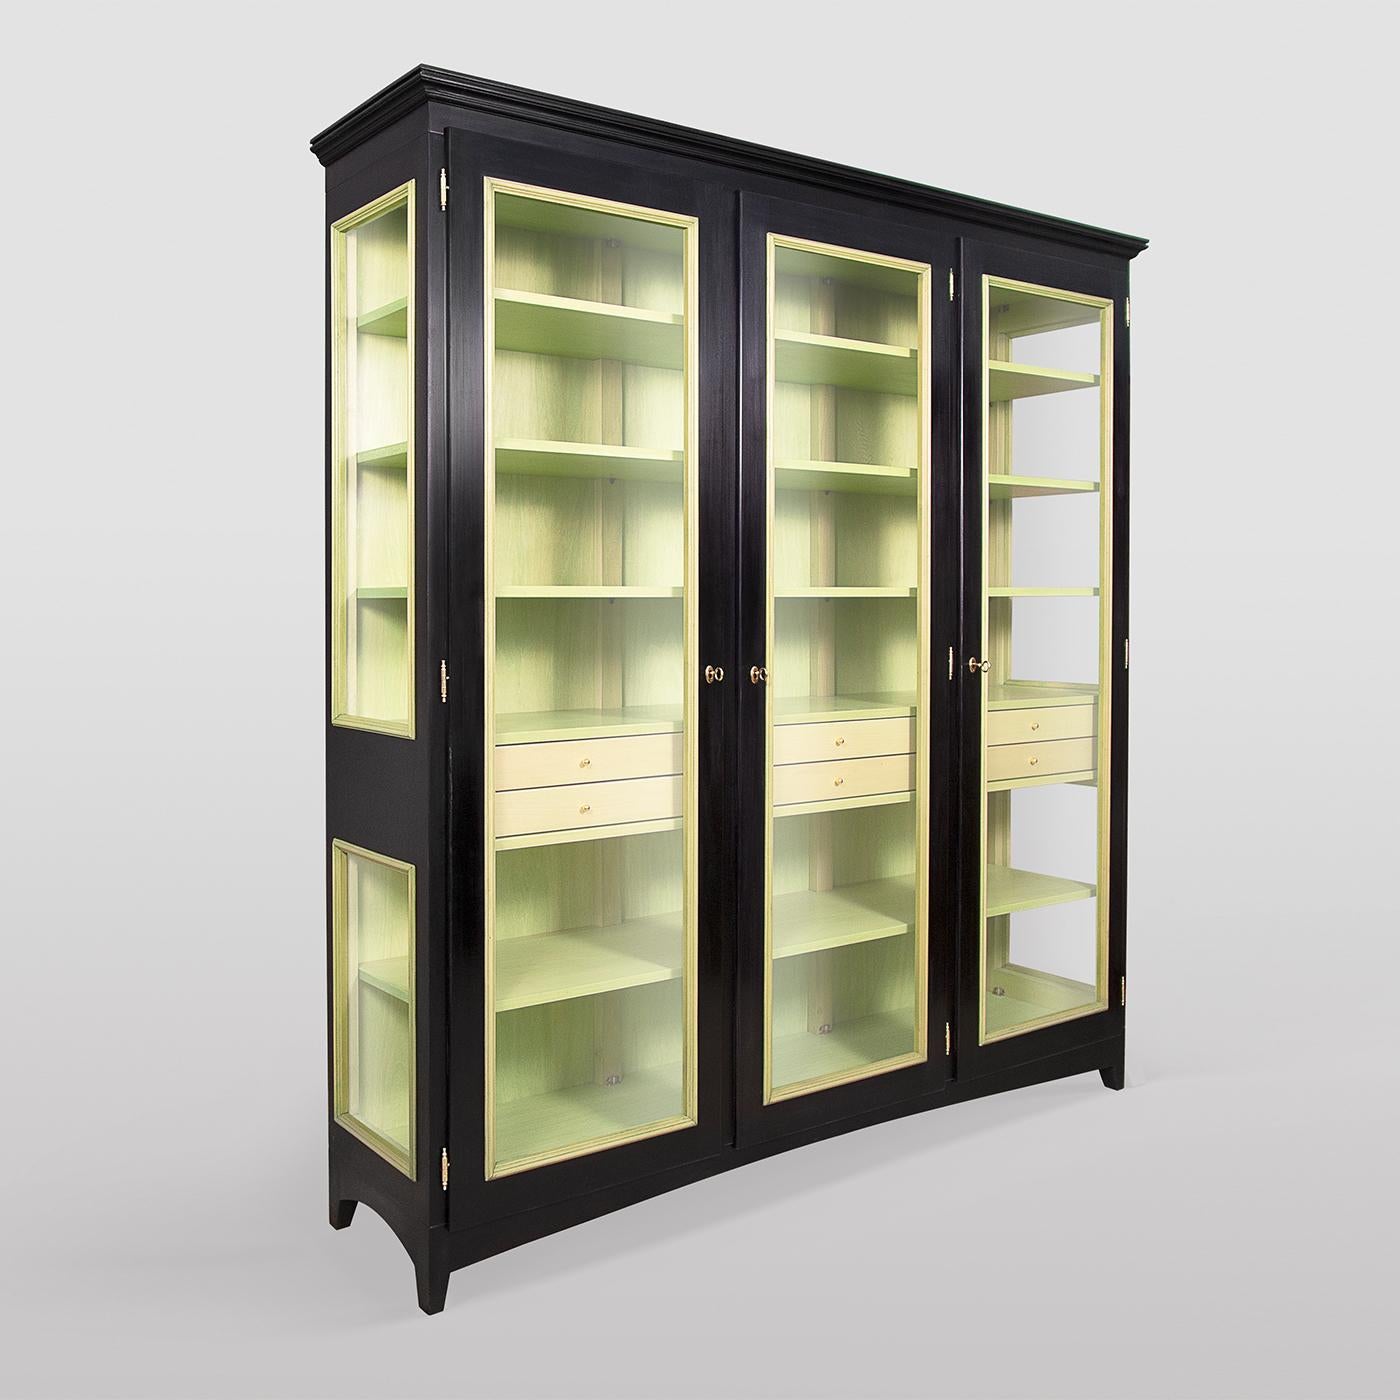 A showcase of well-balanced proportions and exquisite craftsmanship, this display cabinet has a solid lime wood frame with three glass doors equipped with double hook closing (upper and lower), each opening to reveal four shelves and two drawers.